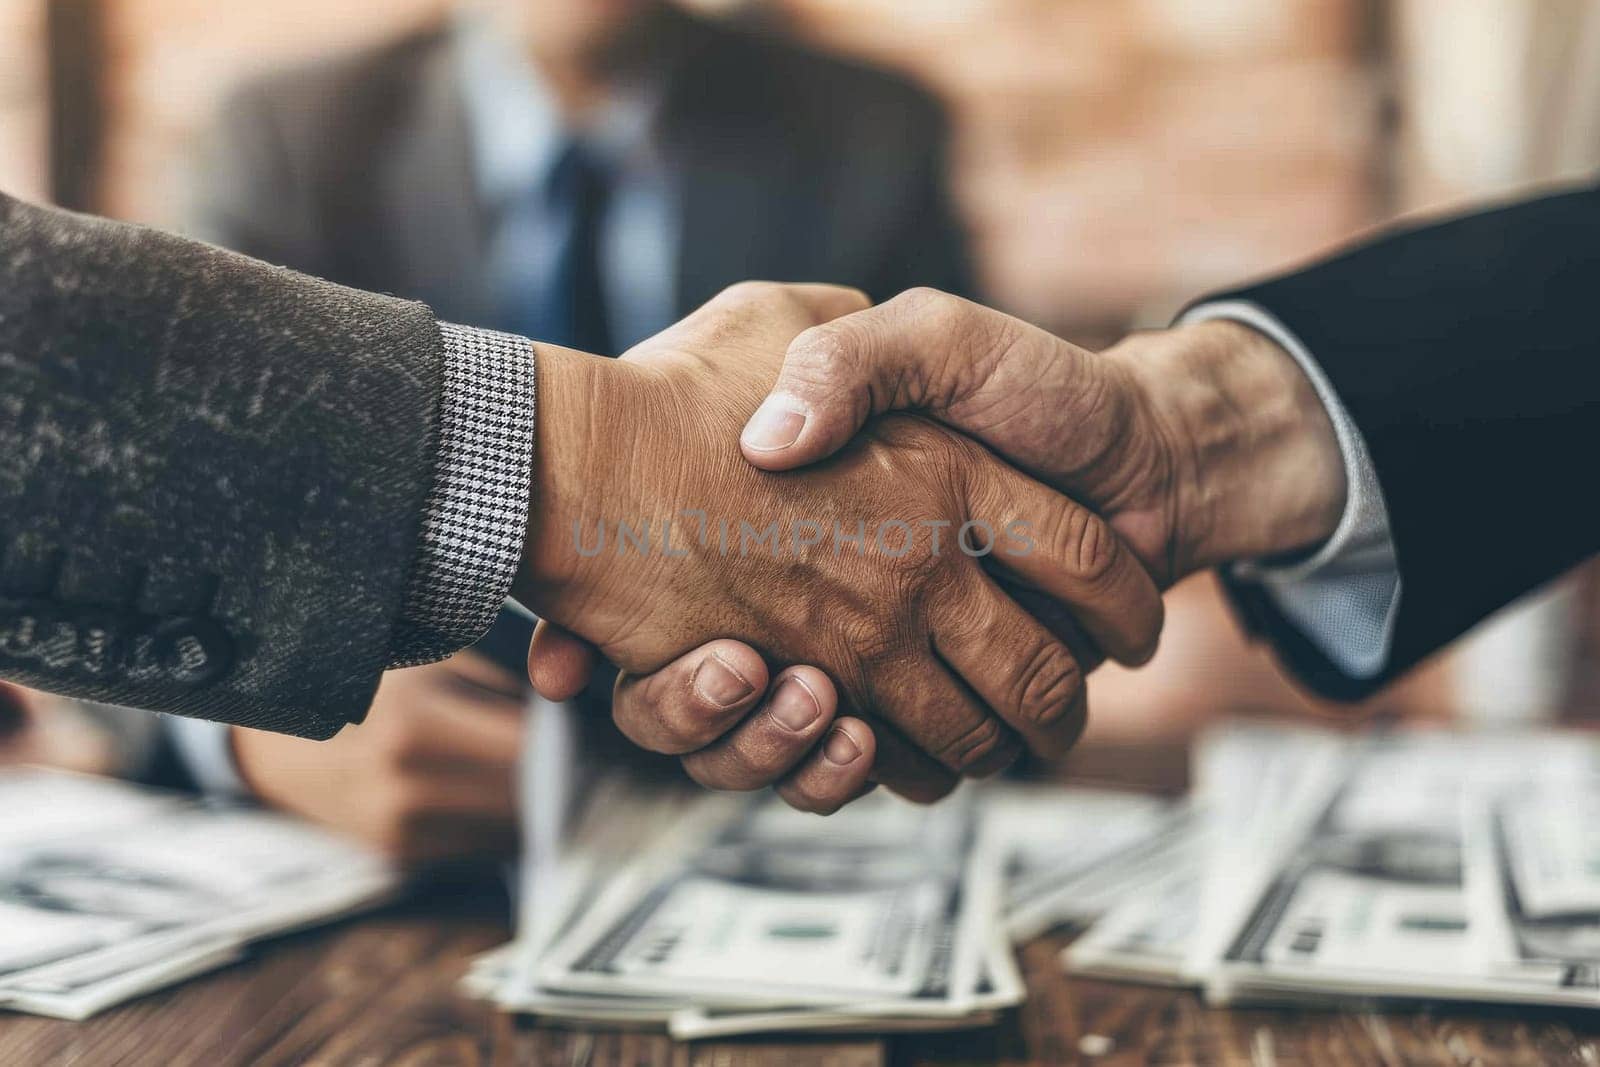 Two men shaking hands in front of a pile of money. Concept of trust and financial agreement between the two men